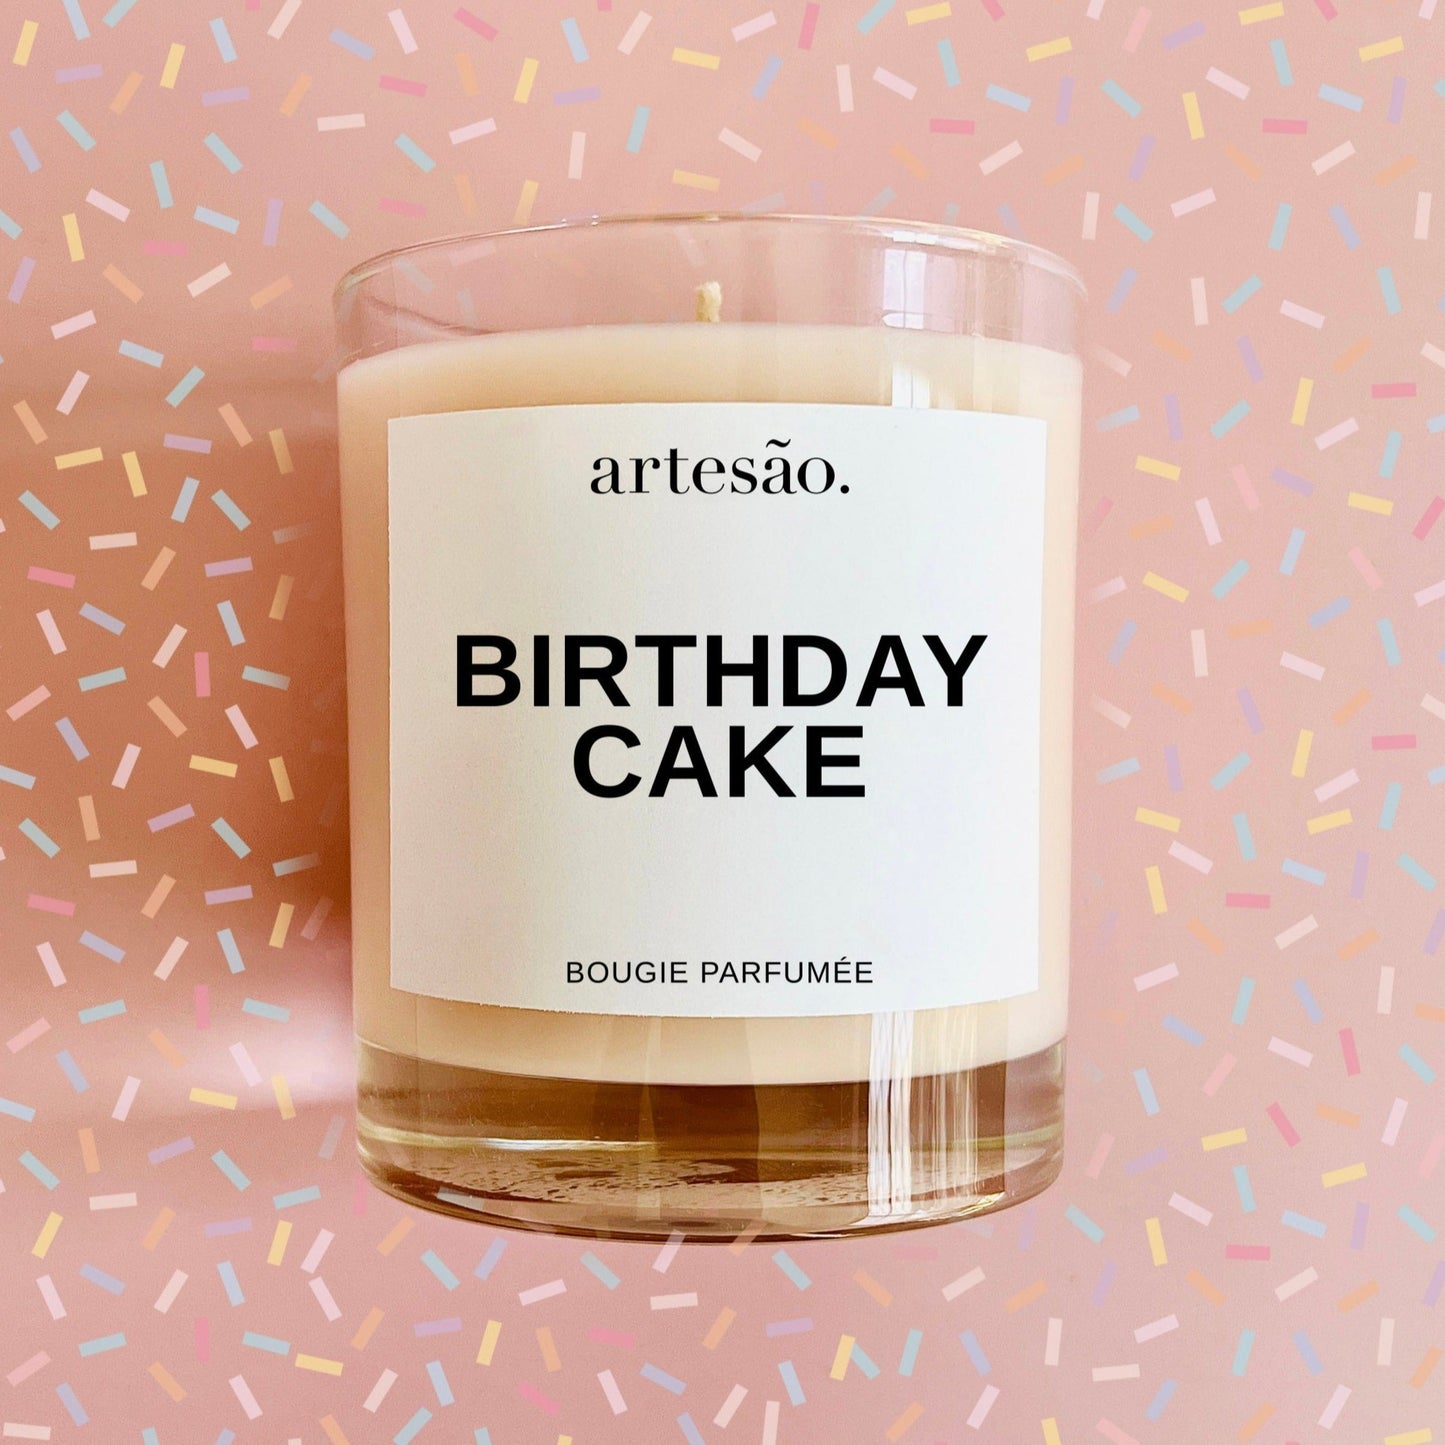 Birthday cake scented soy wax candle. Vegan eco-conscious candles handmade by Artesao